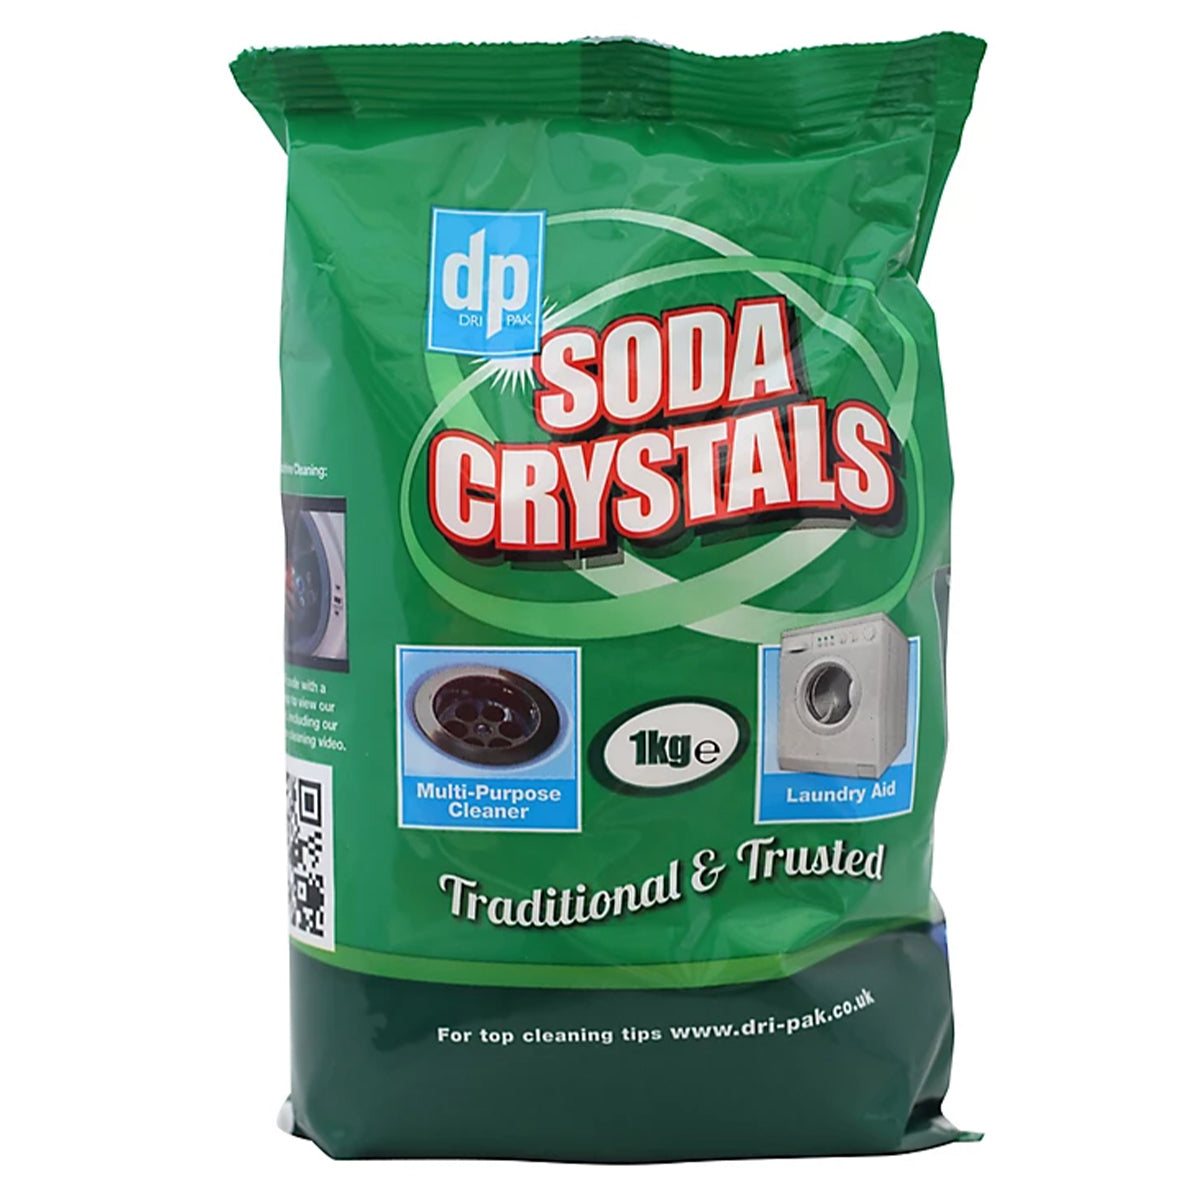 A bag of DP - Clean & Natural Soda Crystals - 1kg on a white background.